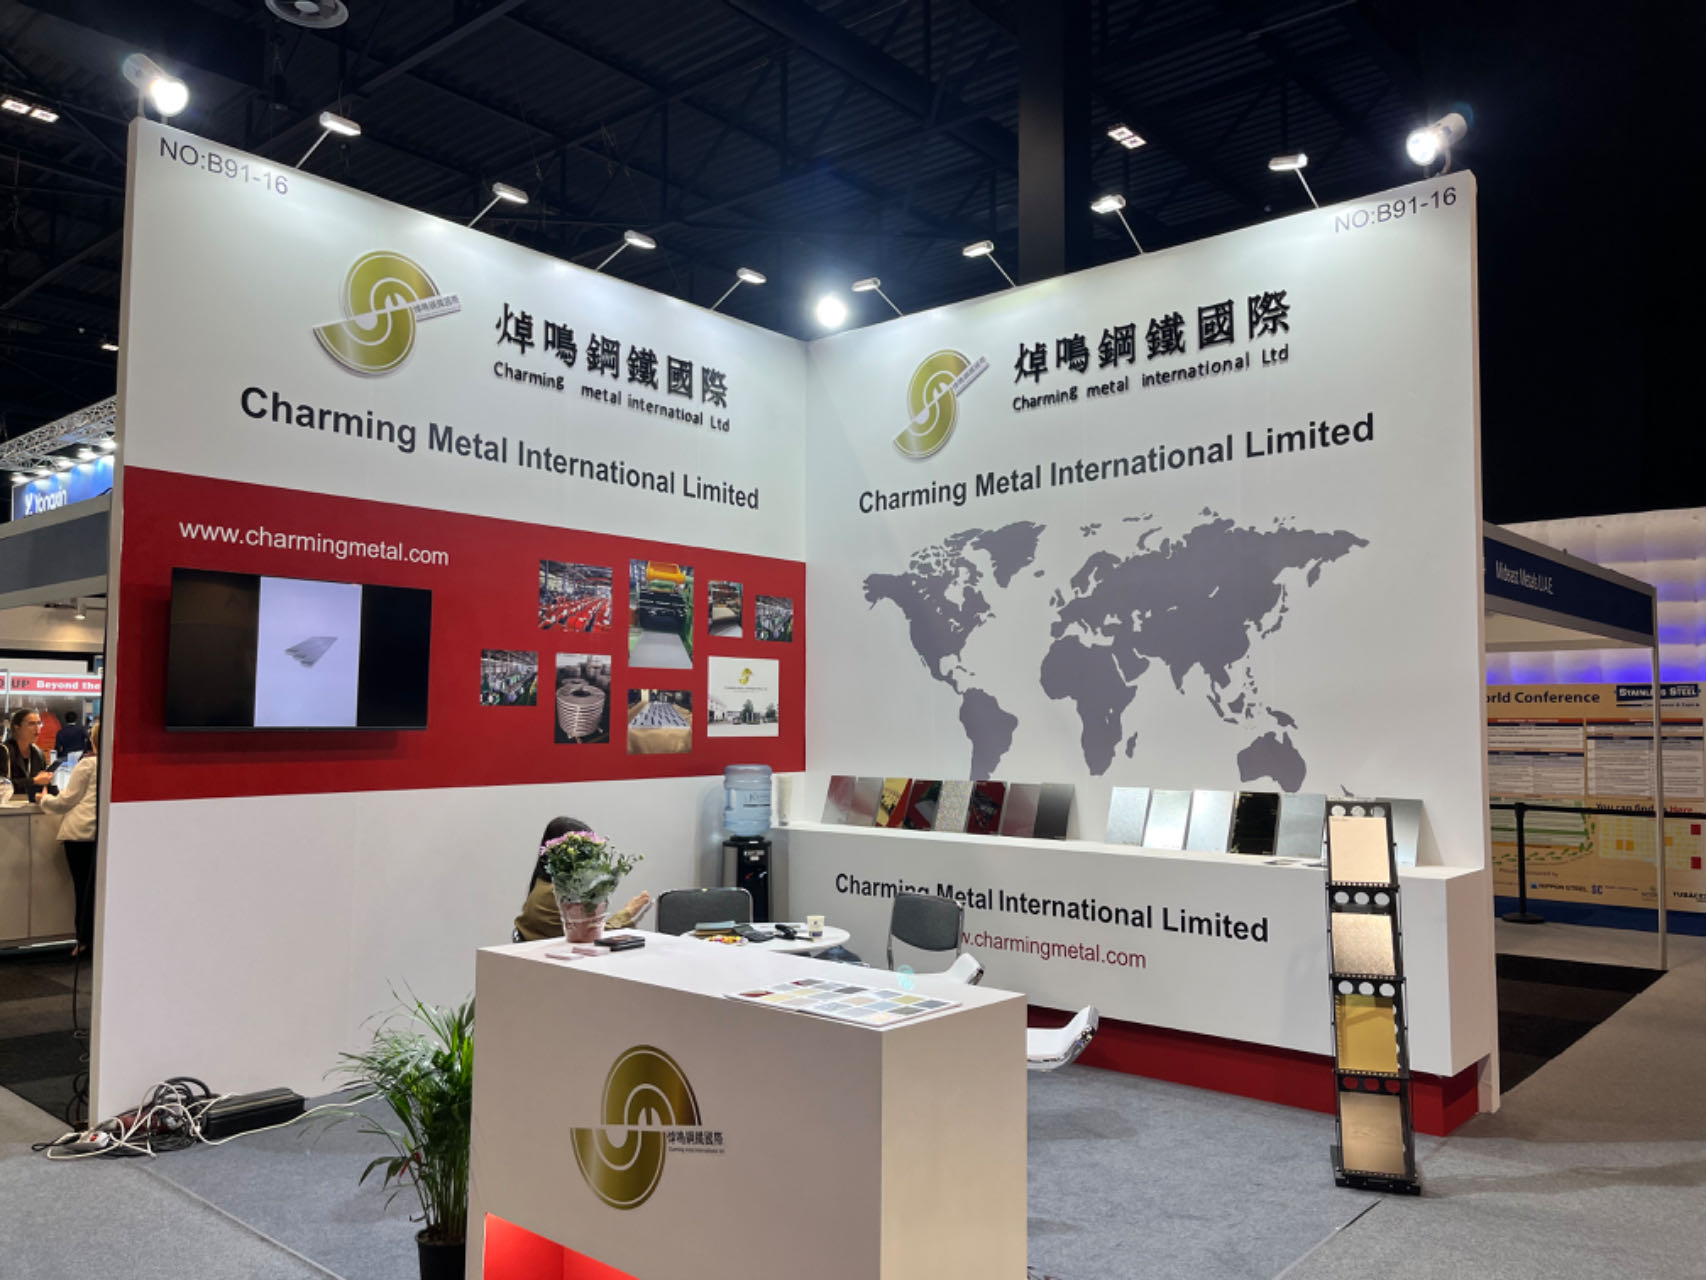 Charming metal international Co., Ltd.-The Stainless Steel World Conference & Exhibiton